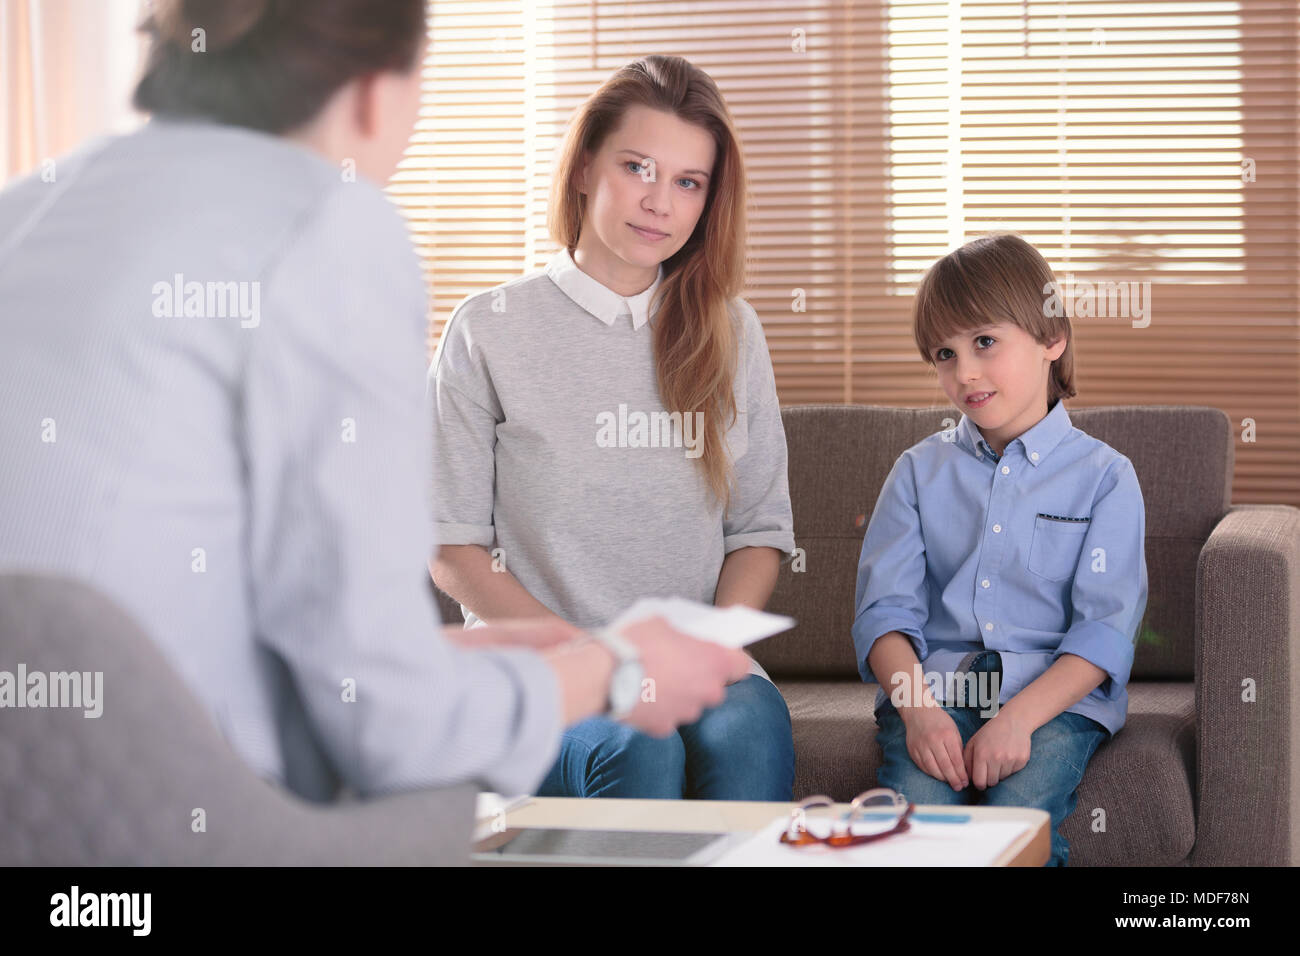 Kid with ADHD and his mother listening to a counselor during meeting in the office Stock Photo